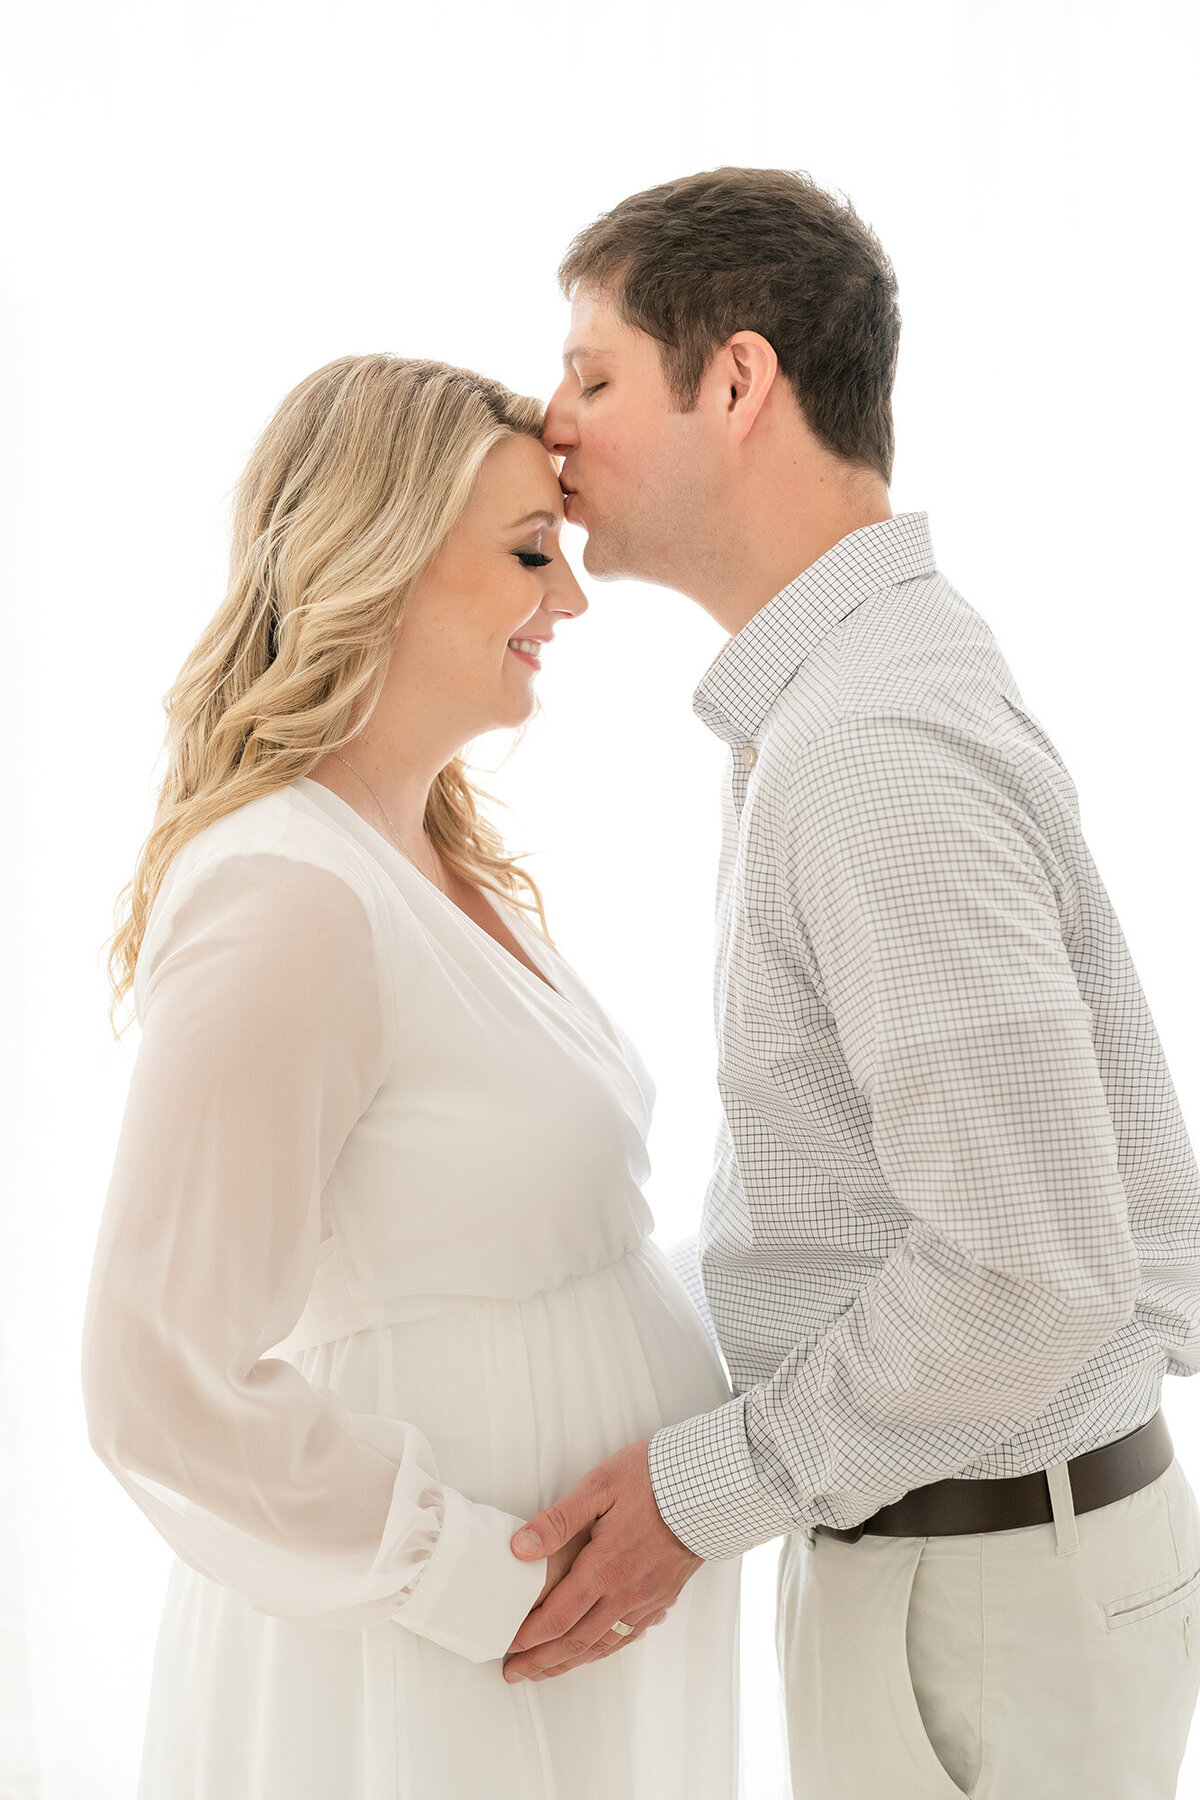 Husband kisses wife's forehead during pregnancy photo shoot at Julie Brock Photography in Louisville Ky